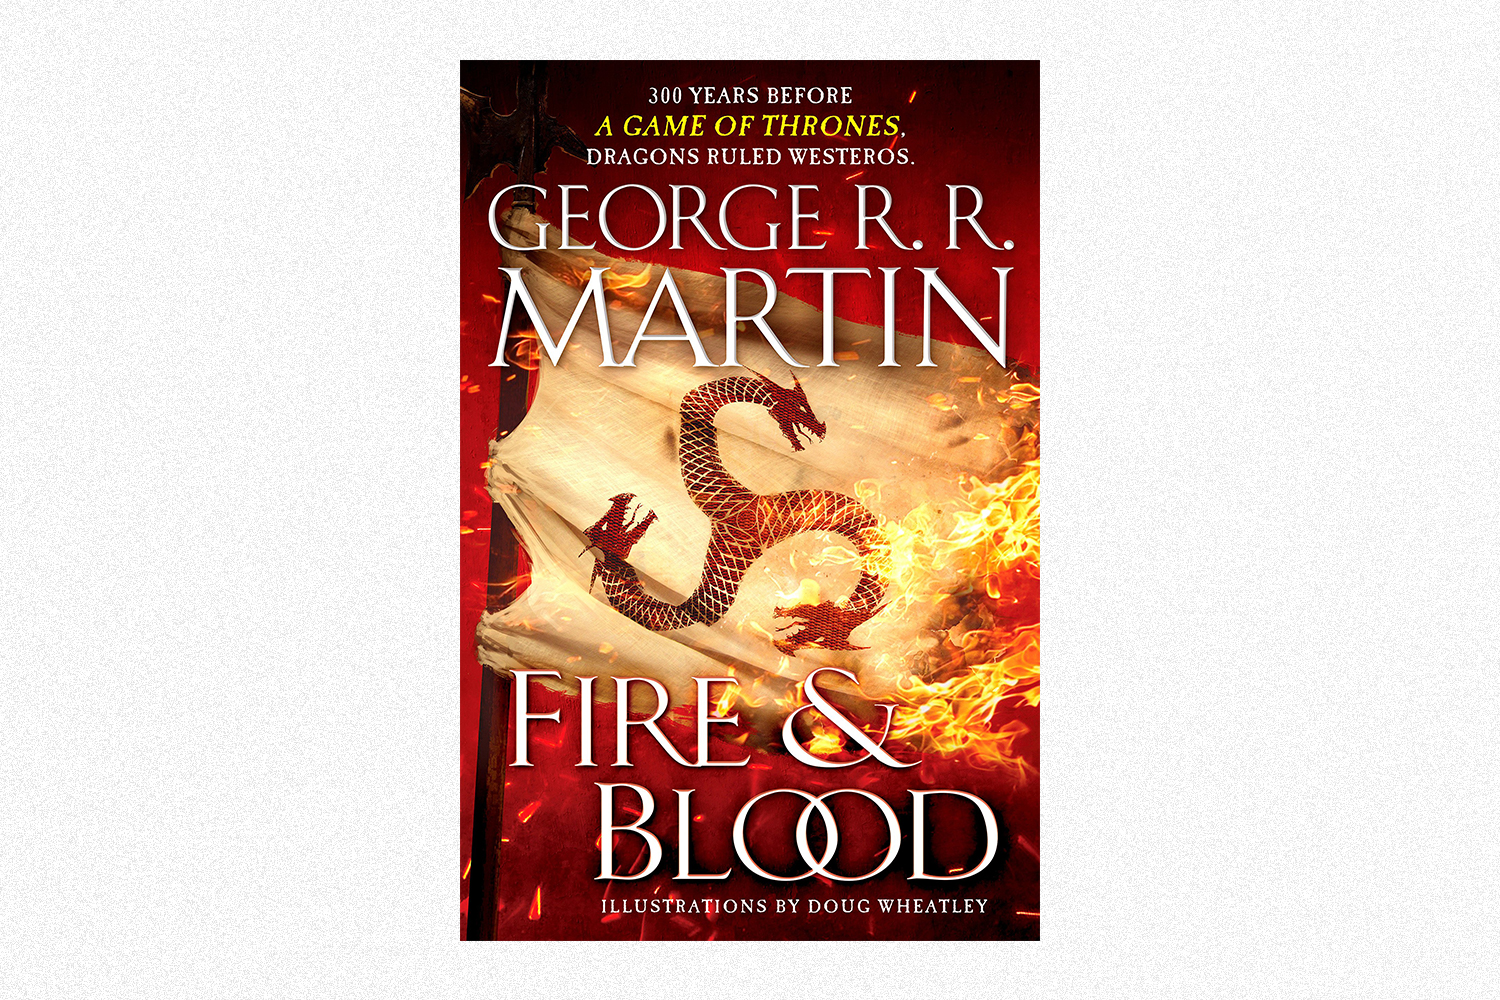 The book cover for Fire & Blood by George R.R. Martin 